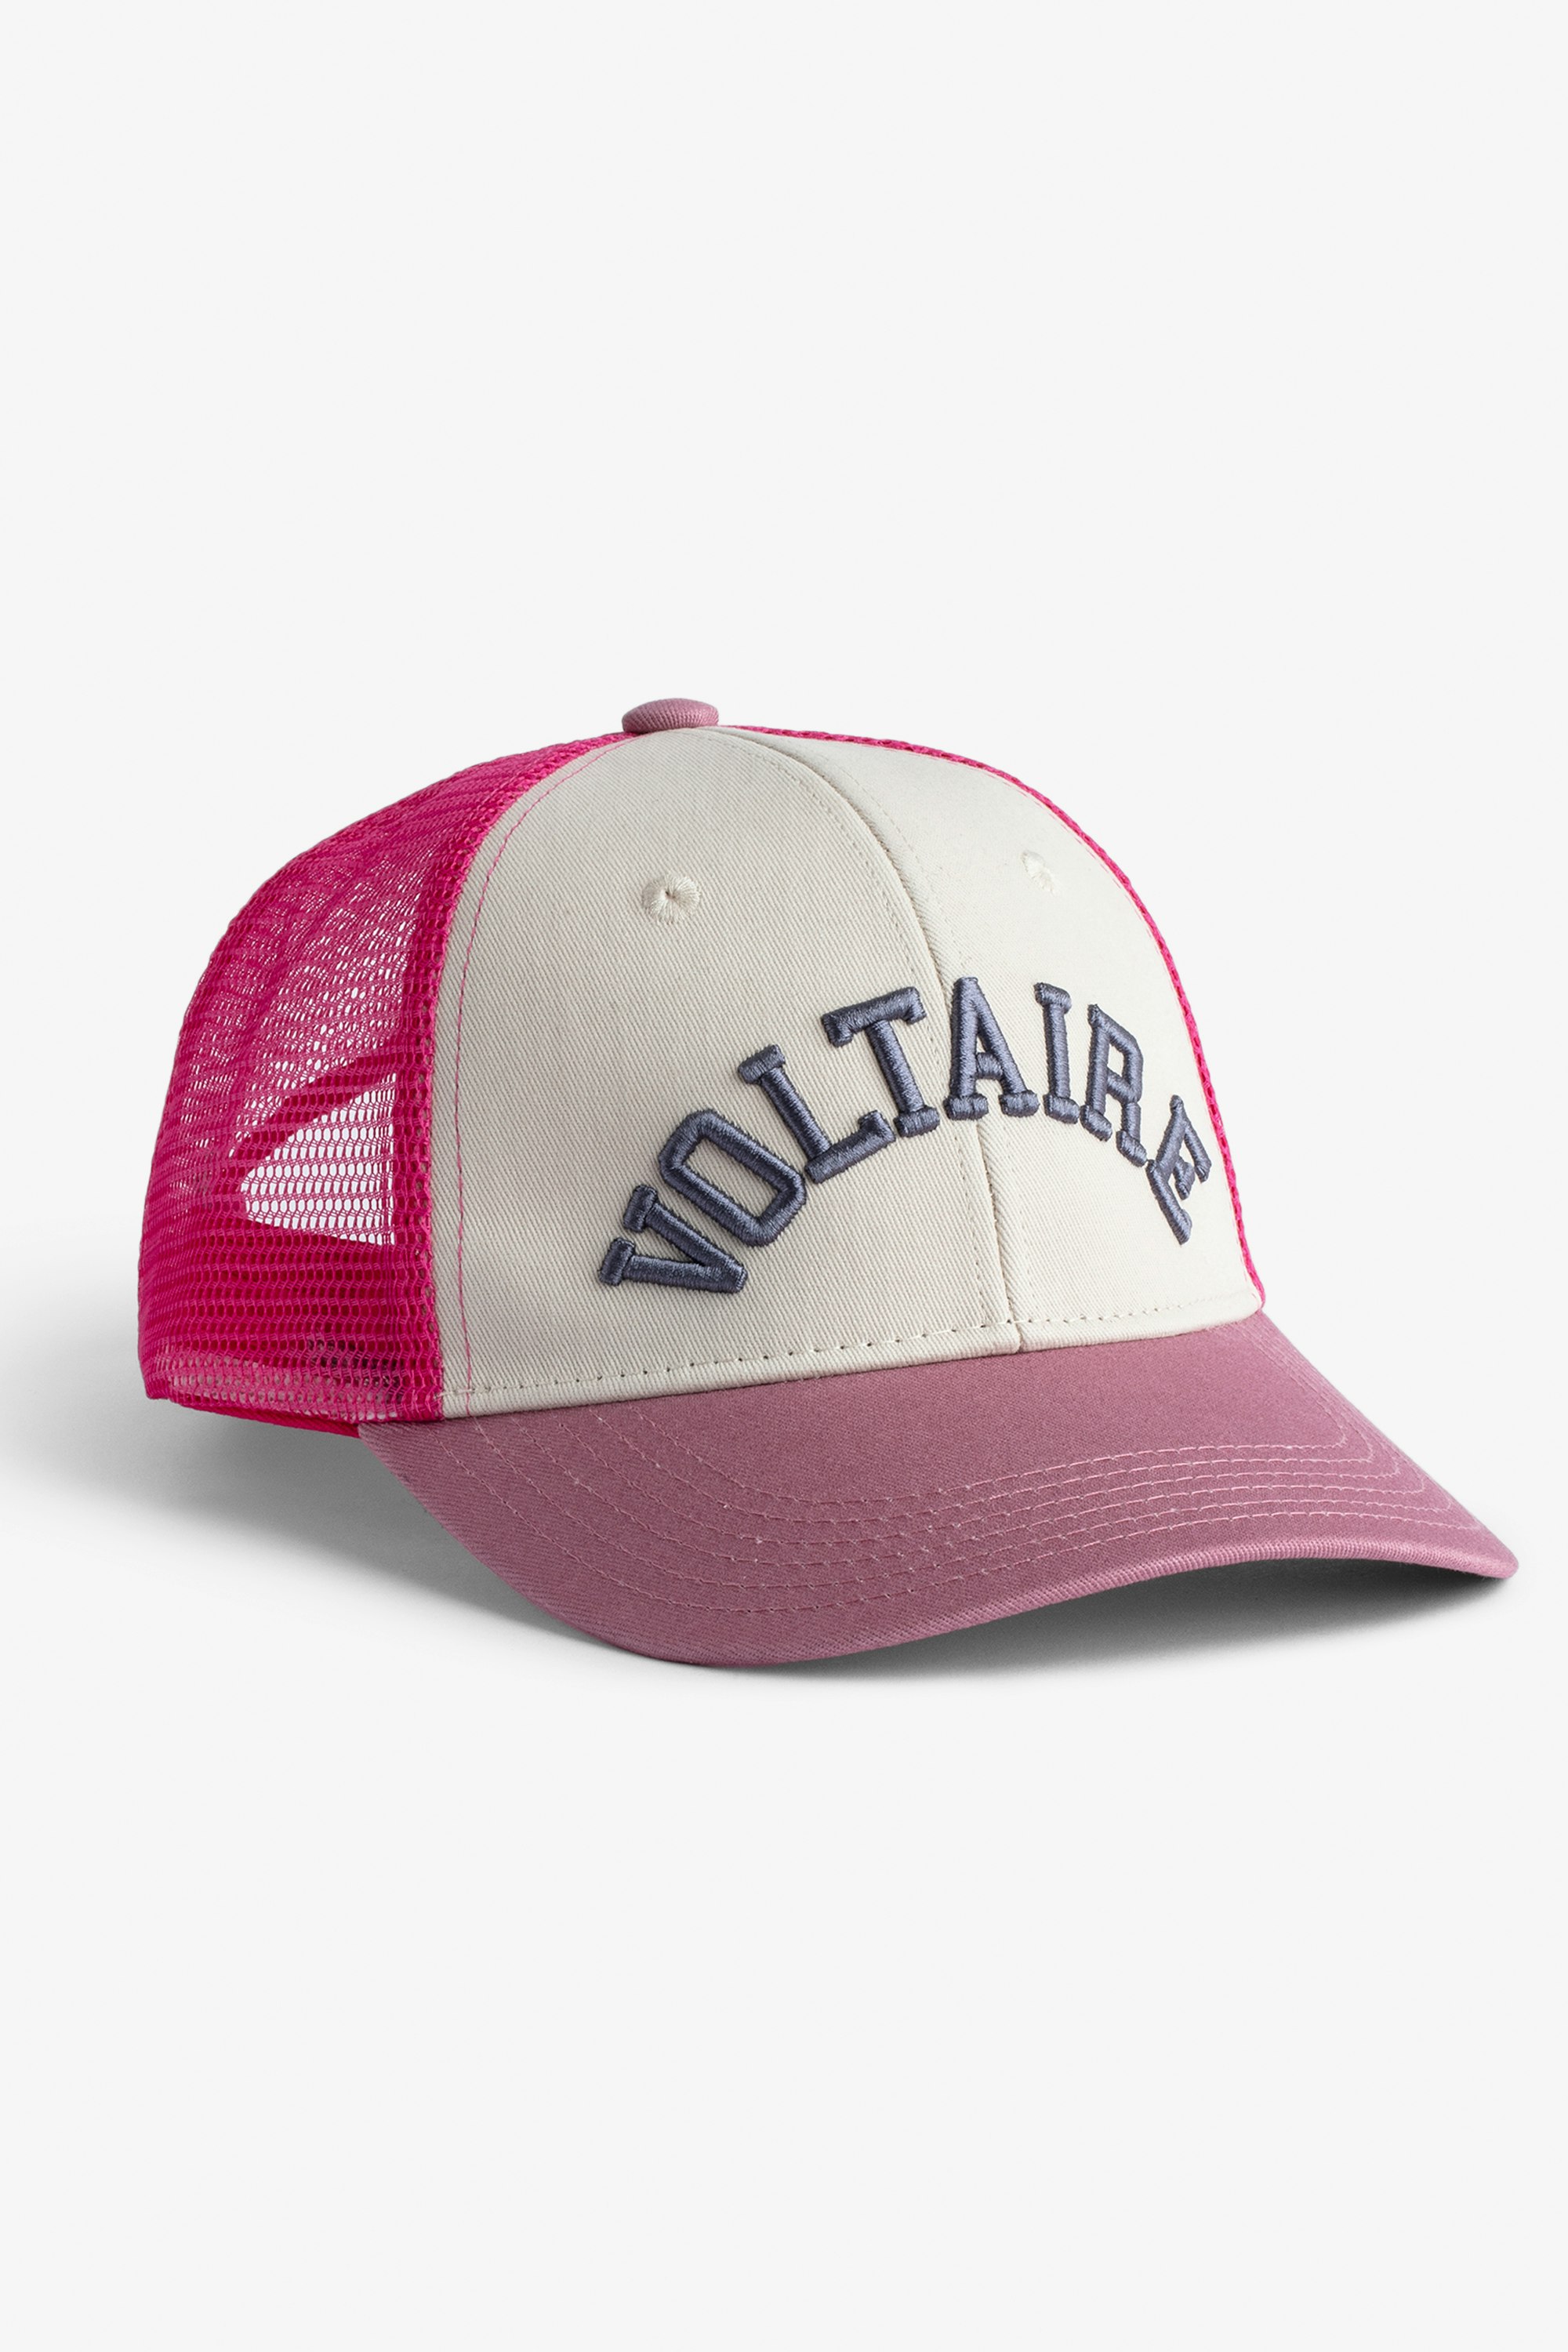 Klelia Voltaire Cap Women’s Voltaire embroidered cap in pink cotton and mesh